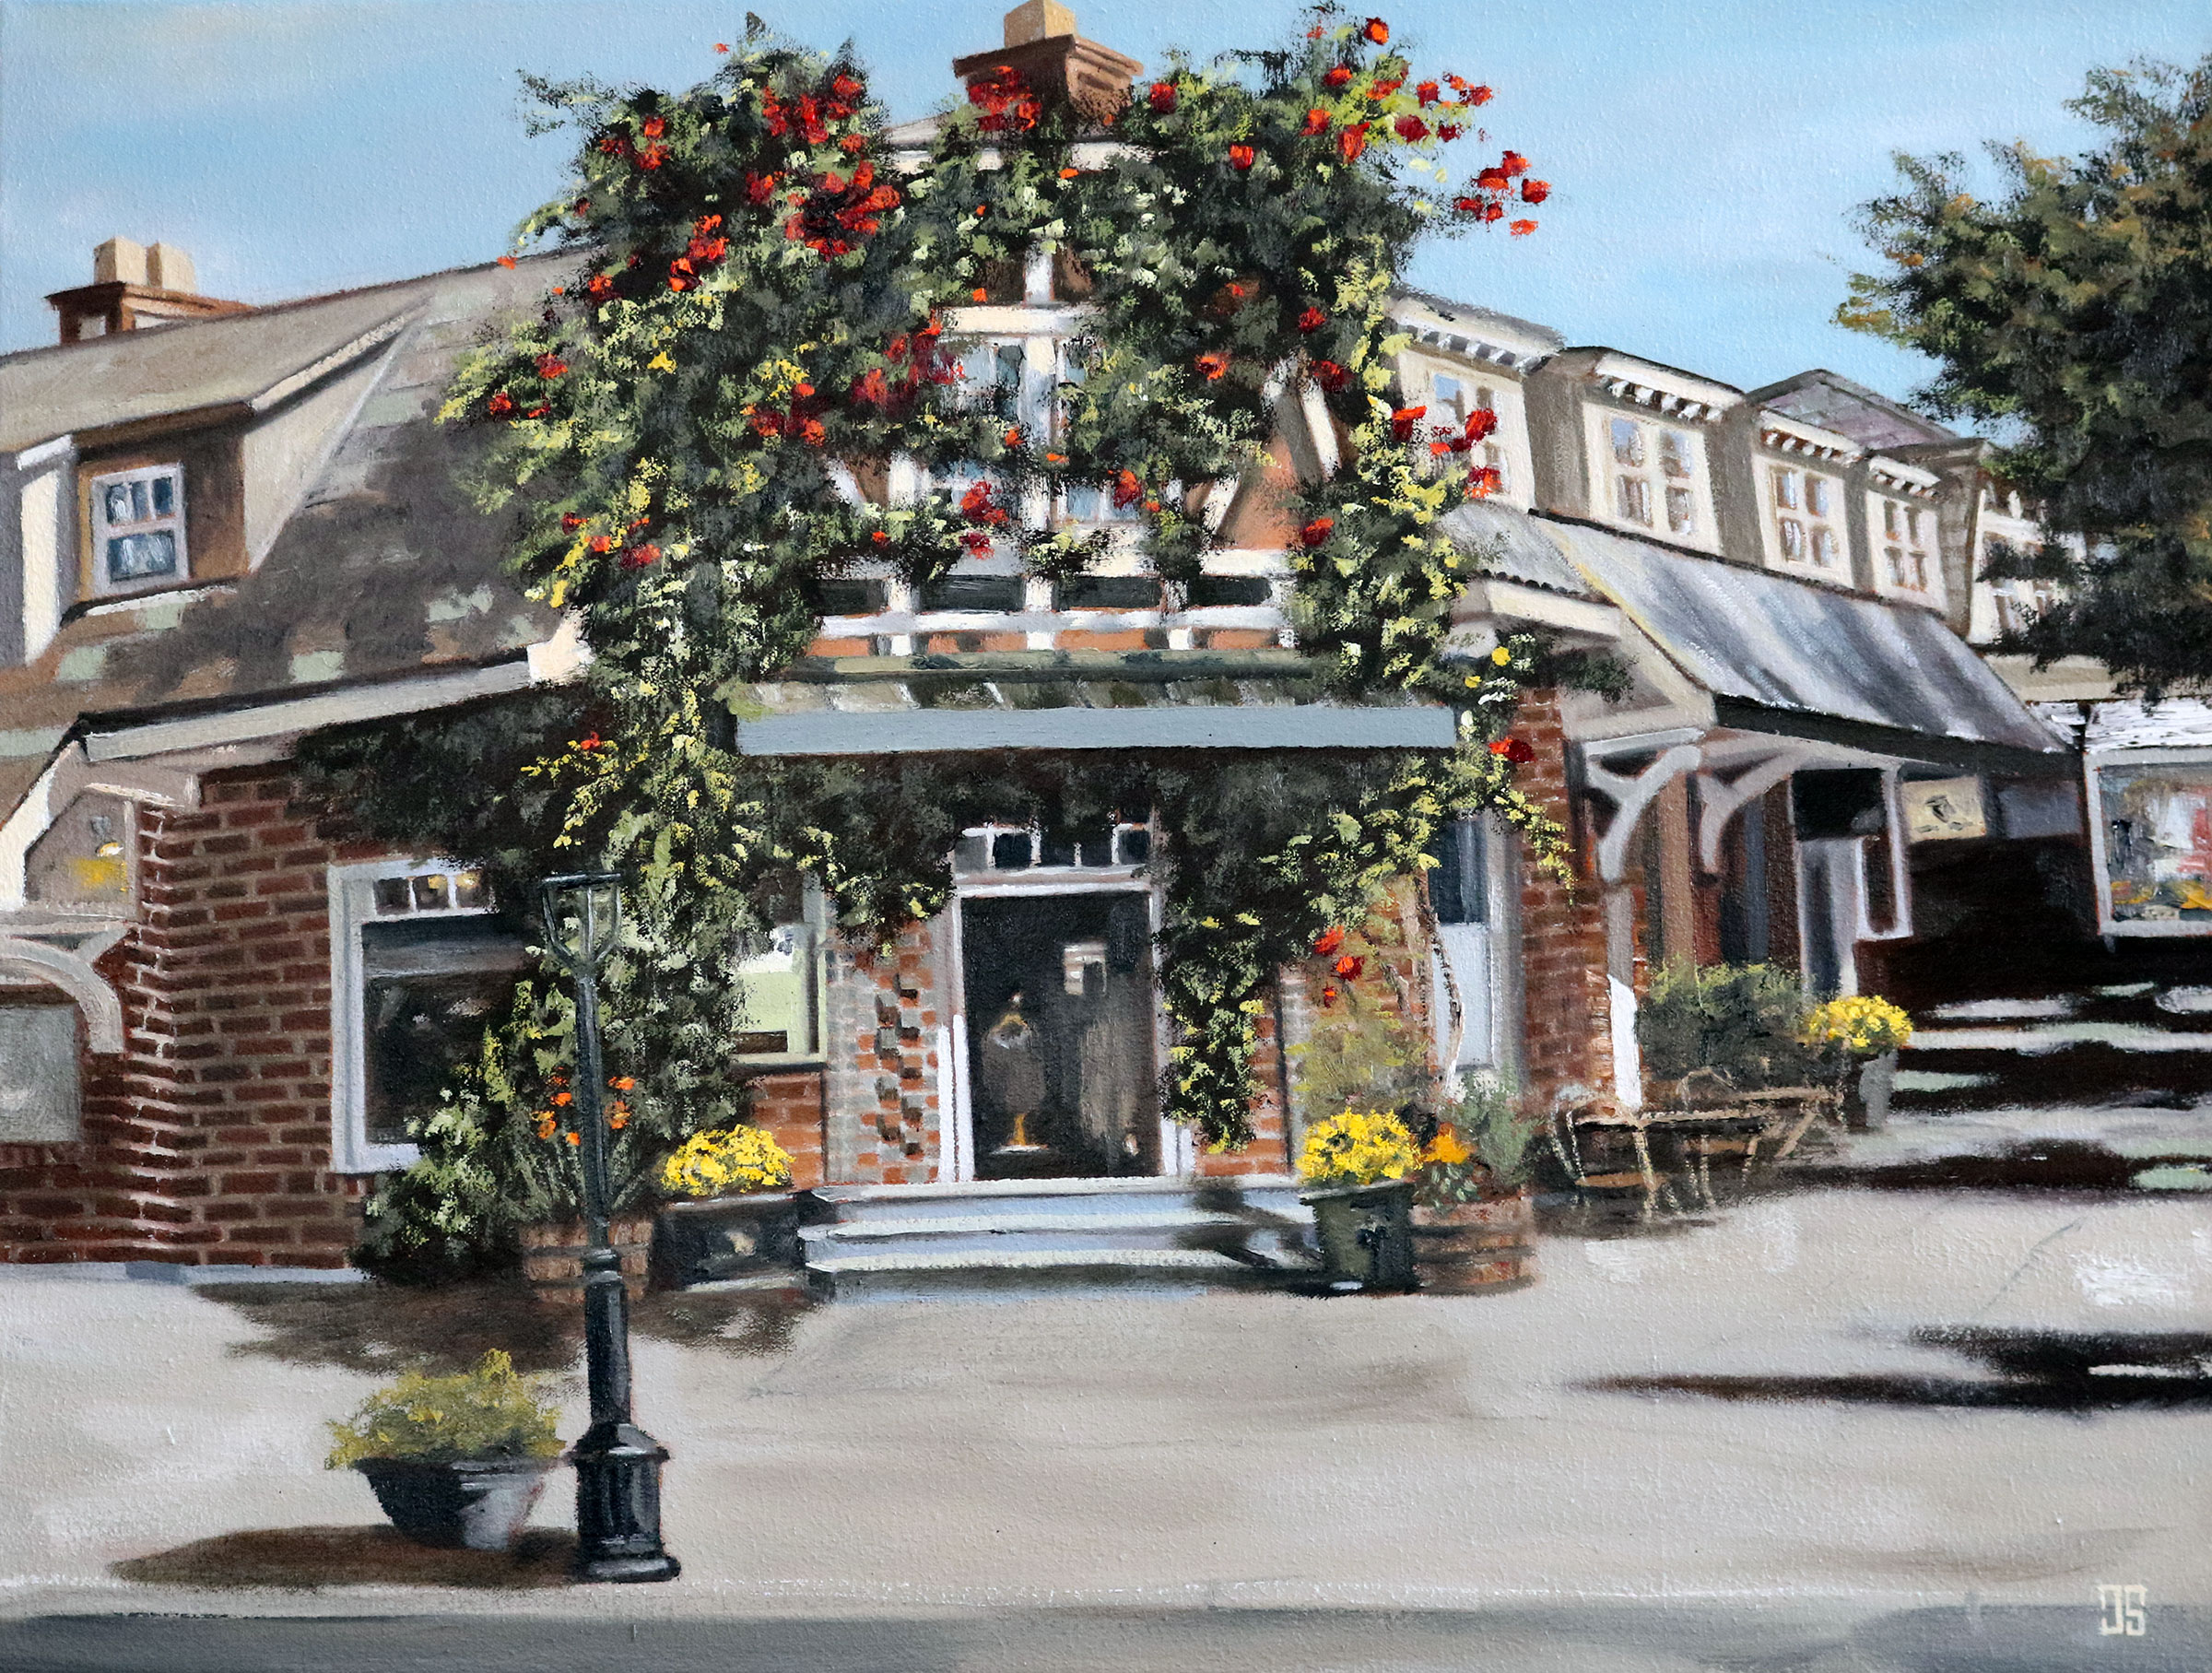 Oil painting "Brick Block, Chatham" by Jeffrey Dale Starr